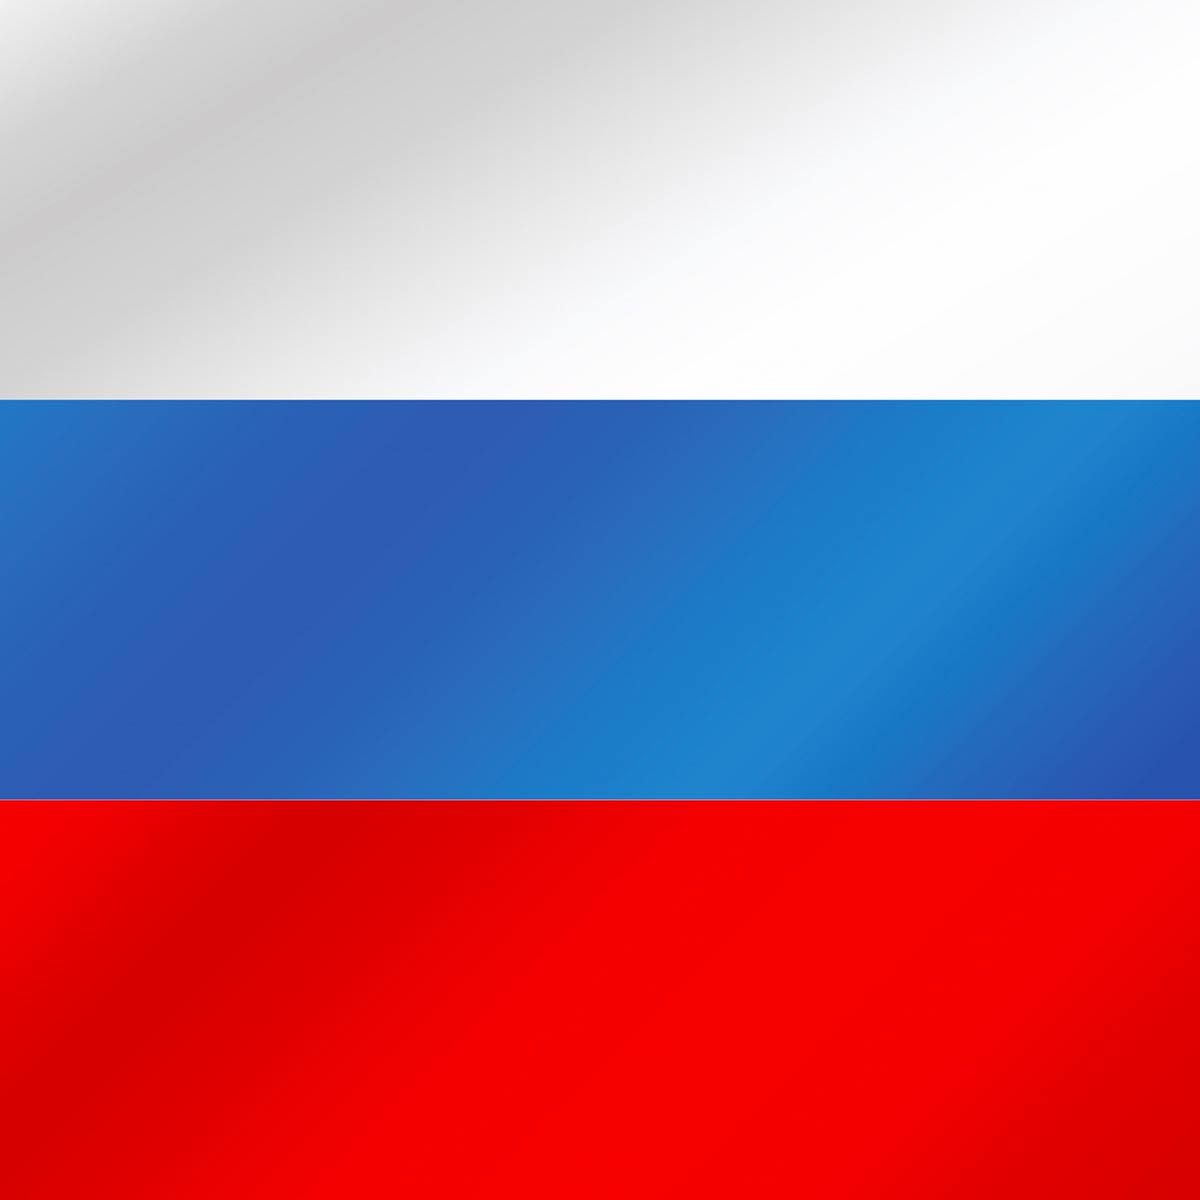 Play State Anthem Of Russia Piano Music Sheet On Virtual Piano - roblox piano sheets national anthem